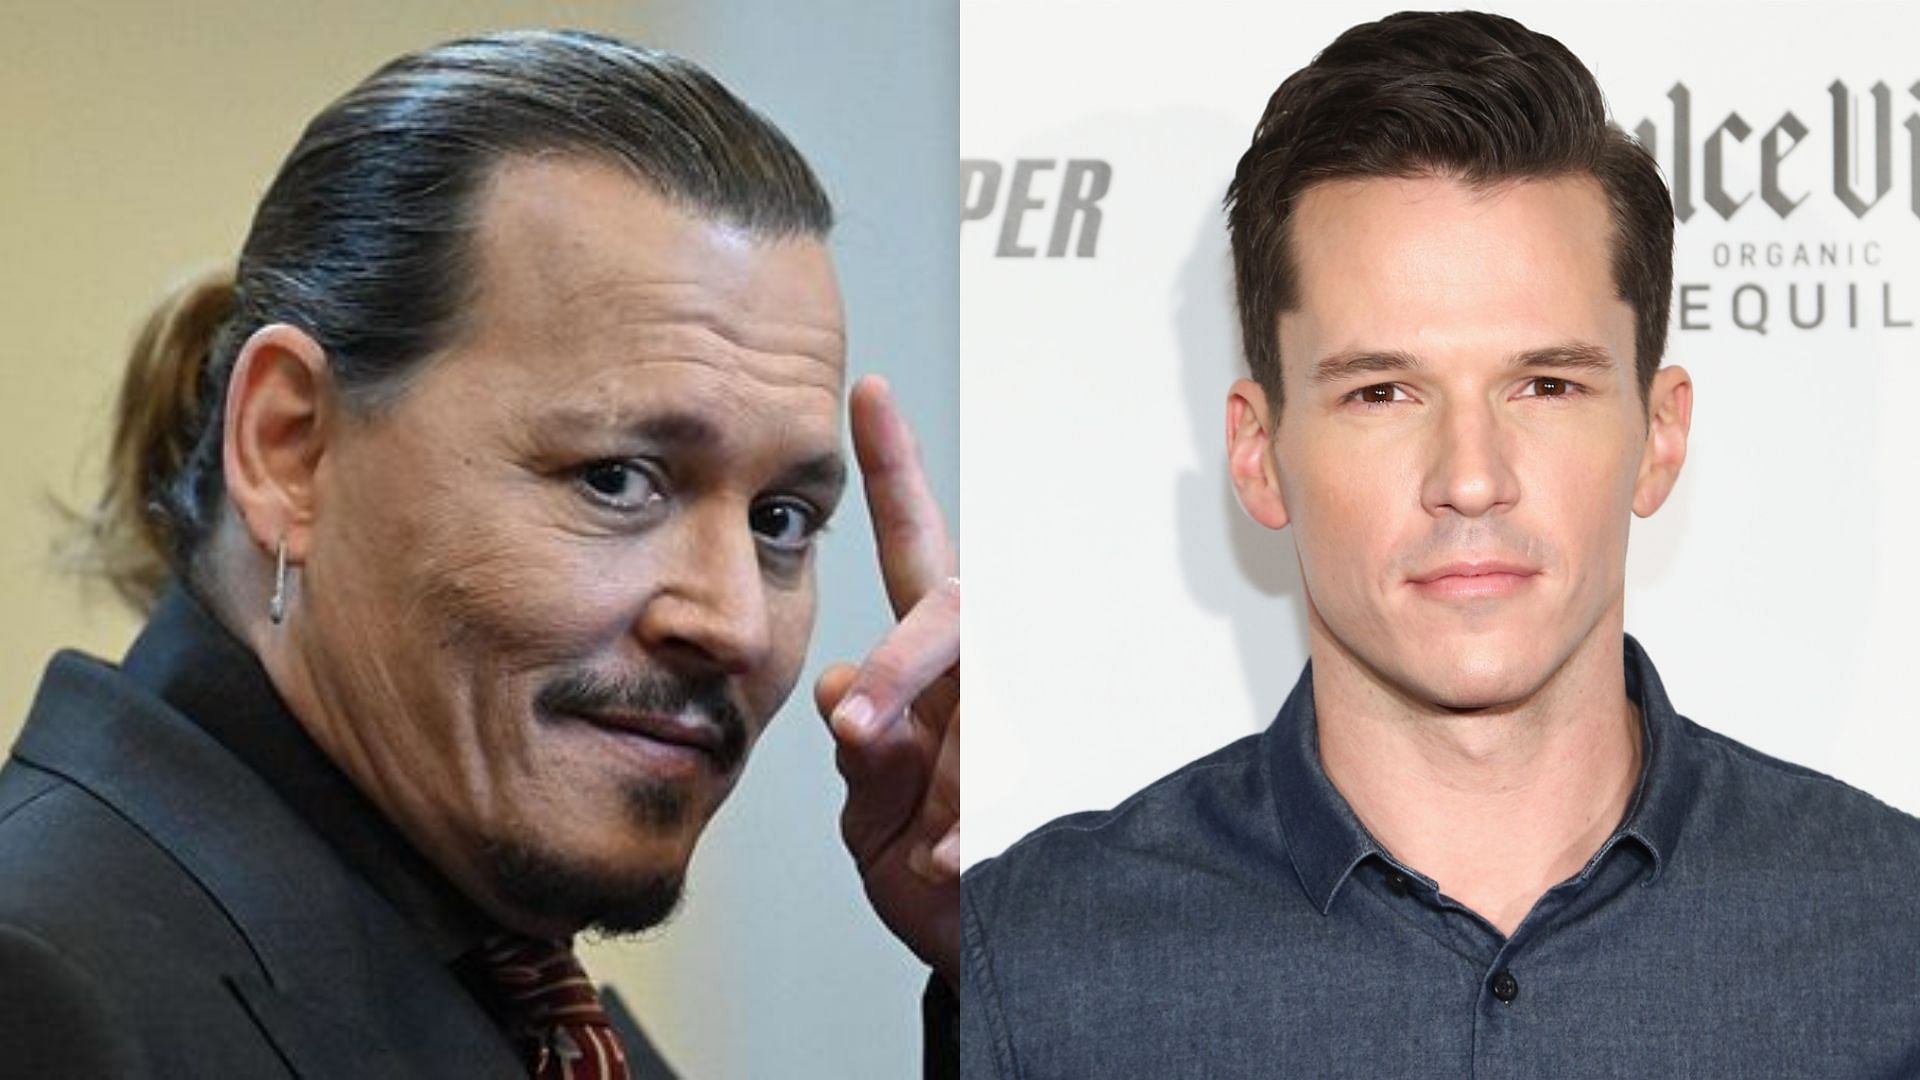 Mark Hapka (right) to star as Johnny Depp in Tubi documentary. (Images via Pool/AFP/Getty Images and Tommaso Boddi/Getty Images)